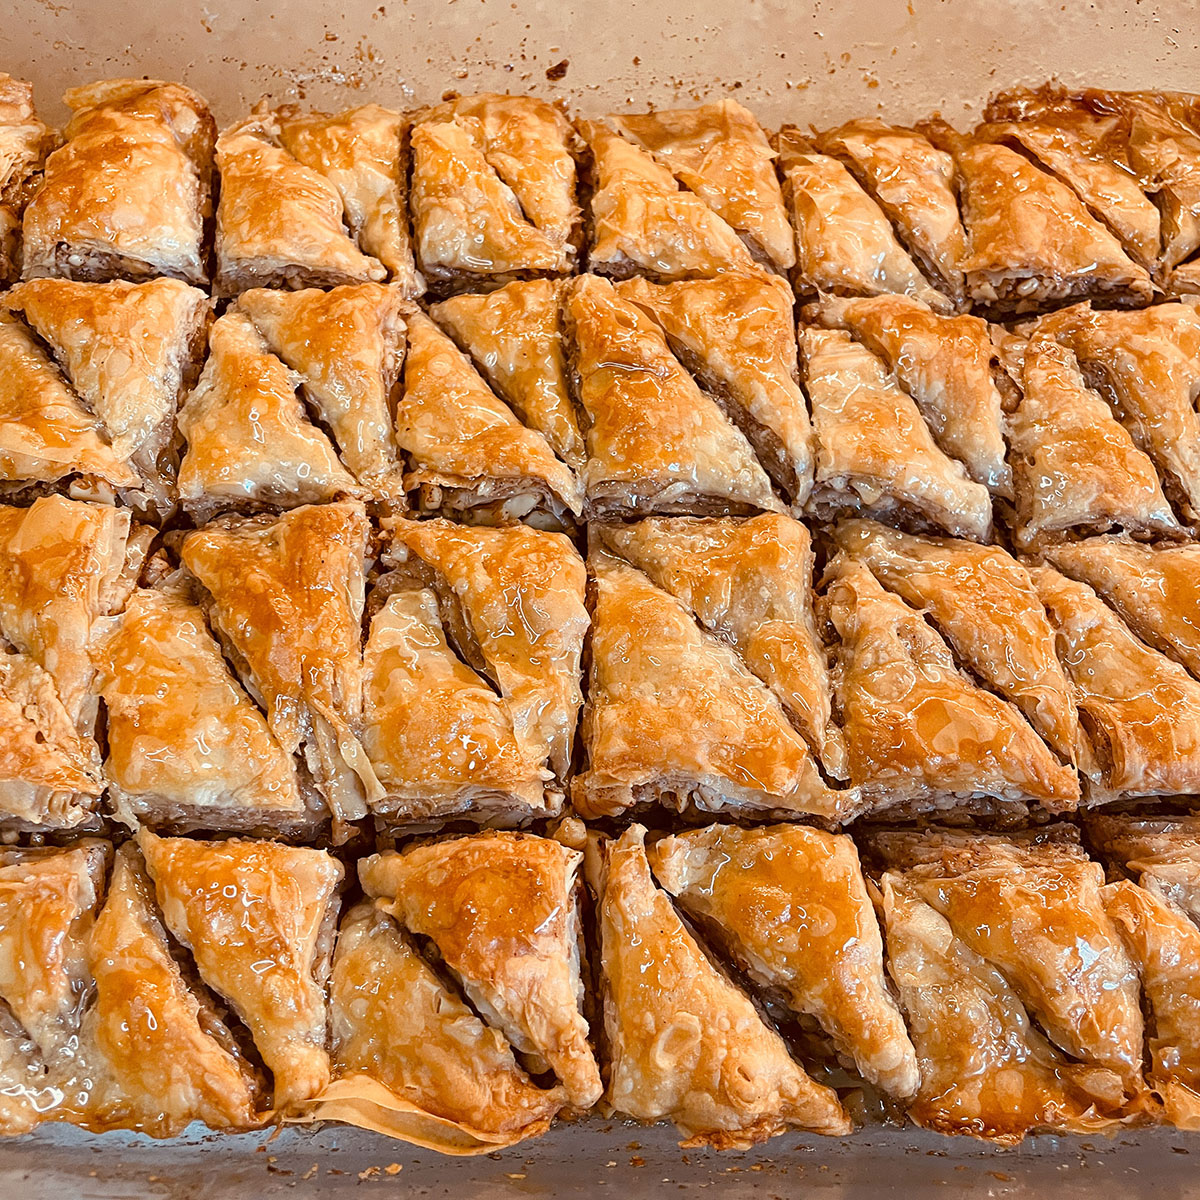 Baklava - After adding the syrup